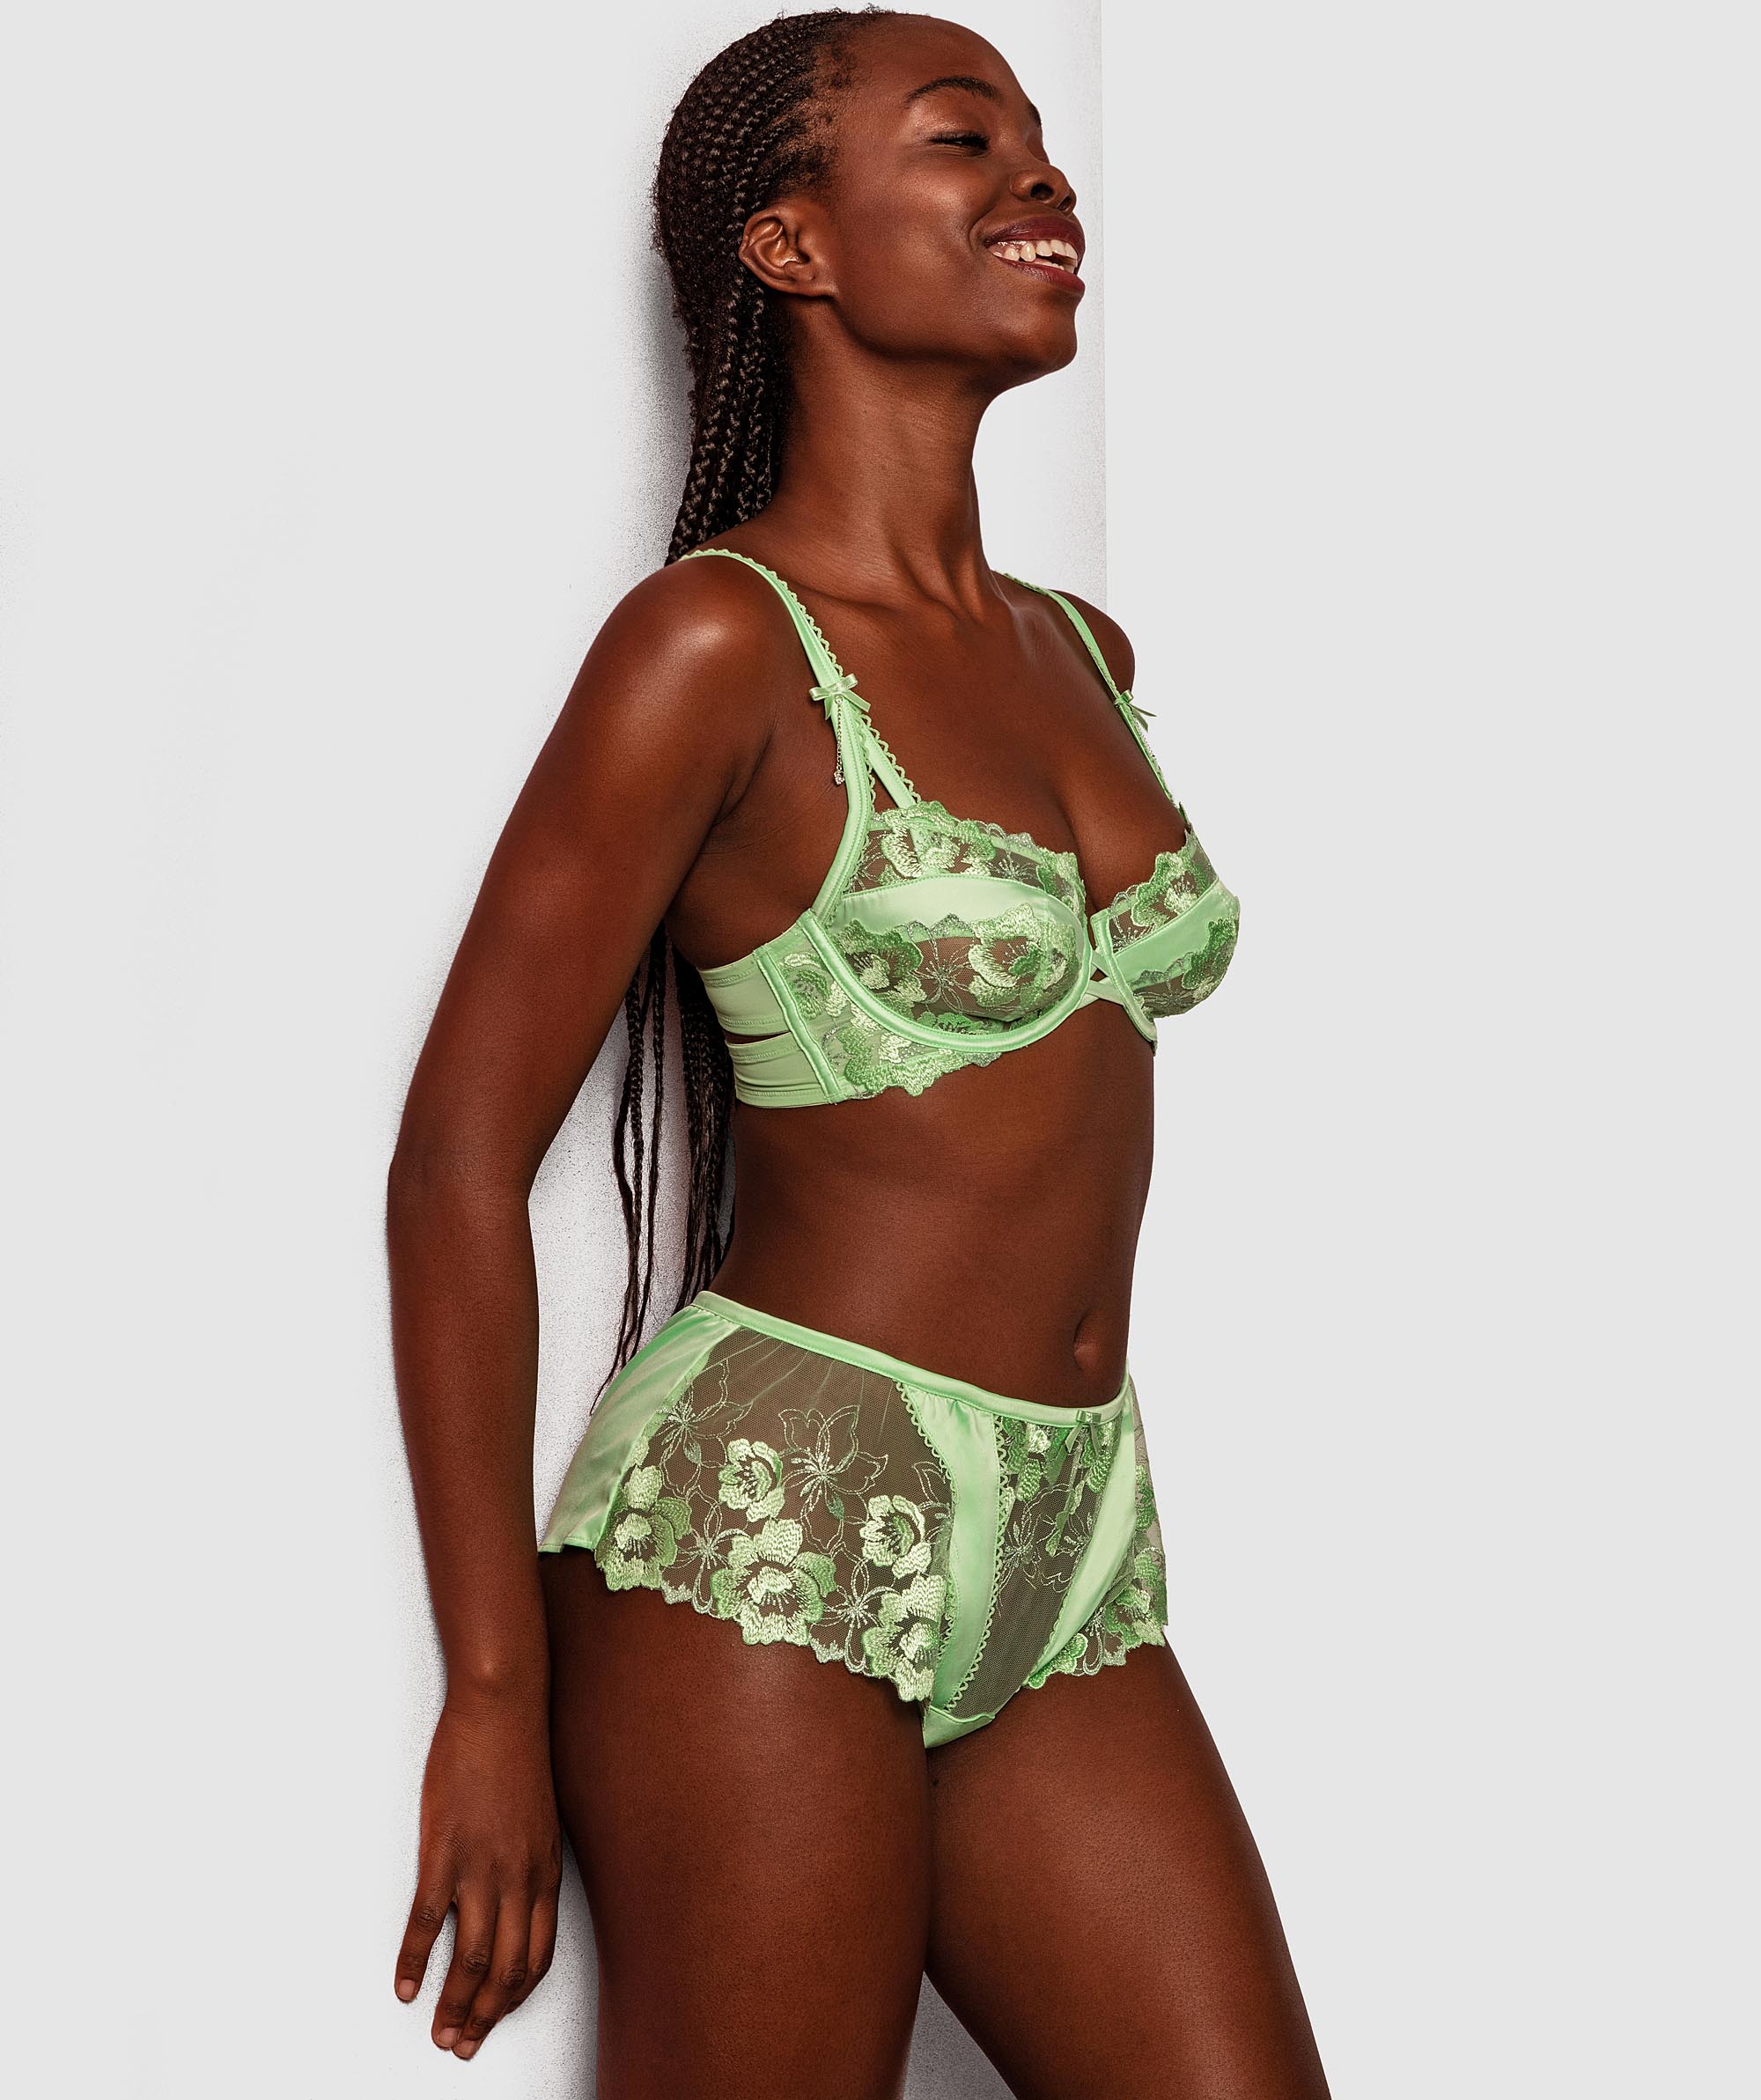 Enchanted Marveling At Your Beauty French Knicker - Light Green